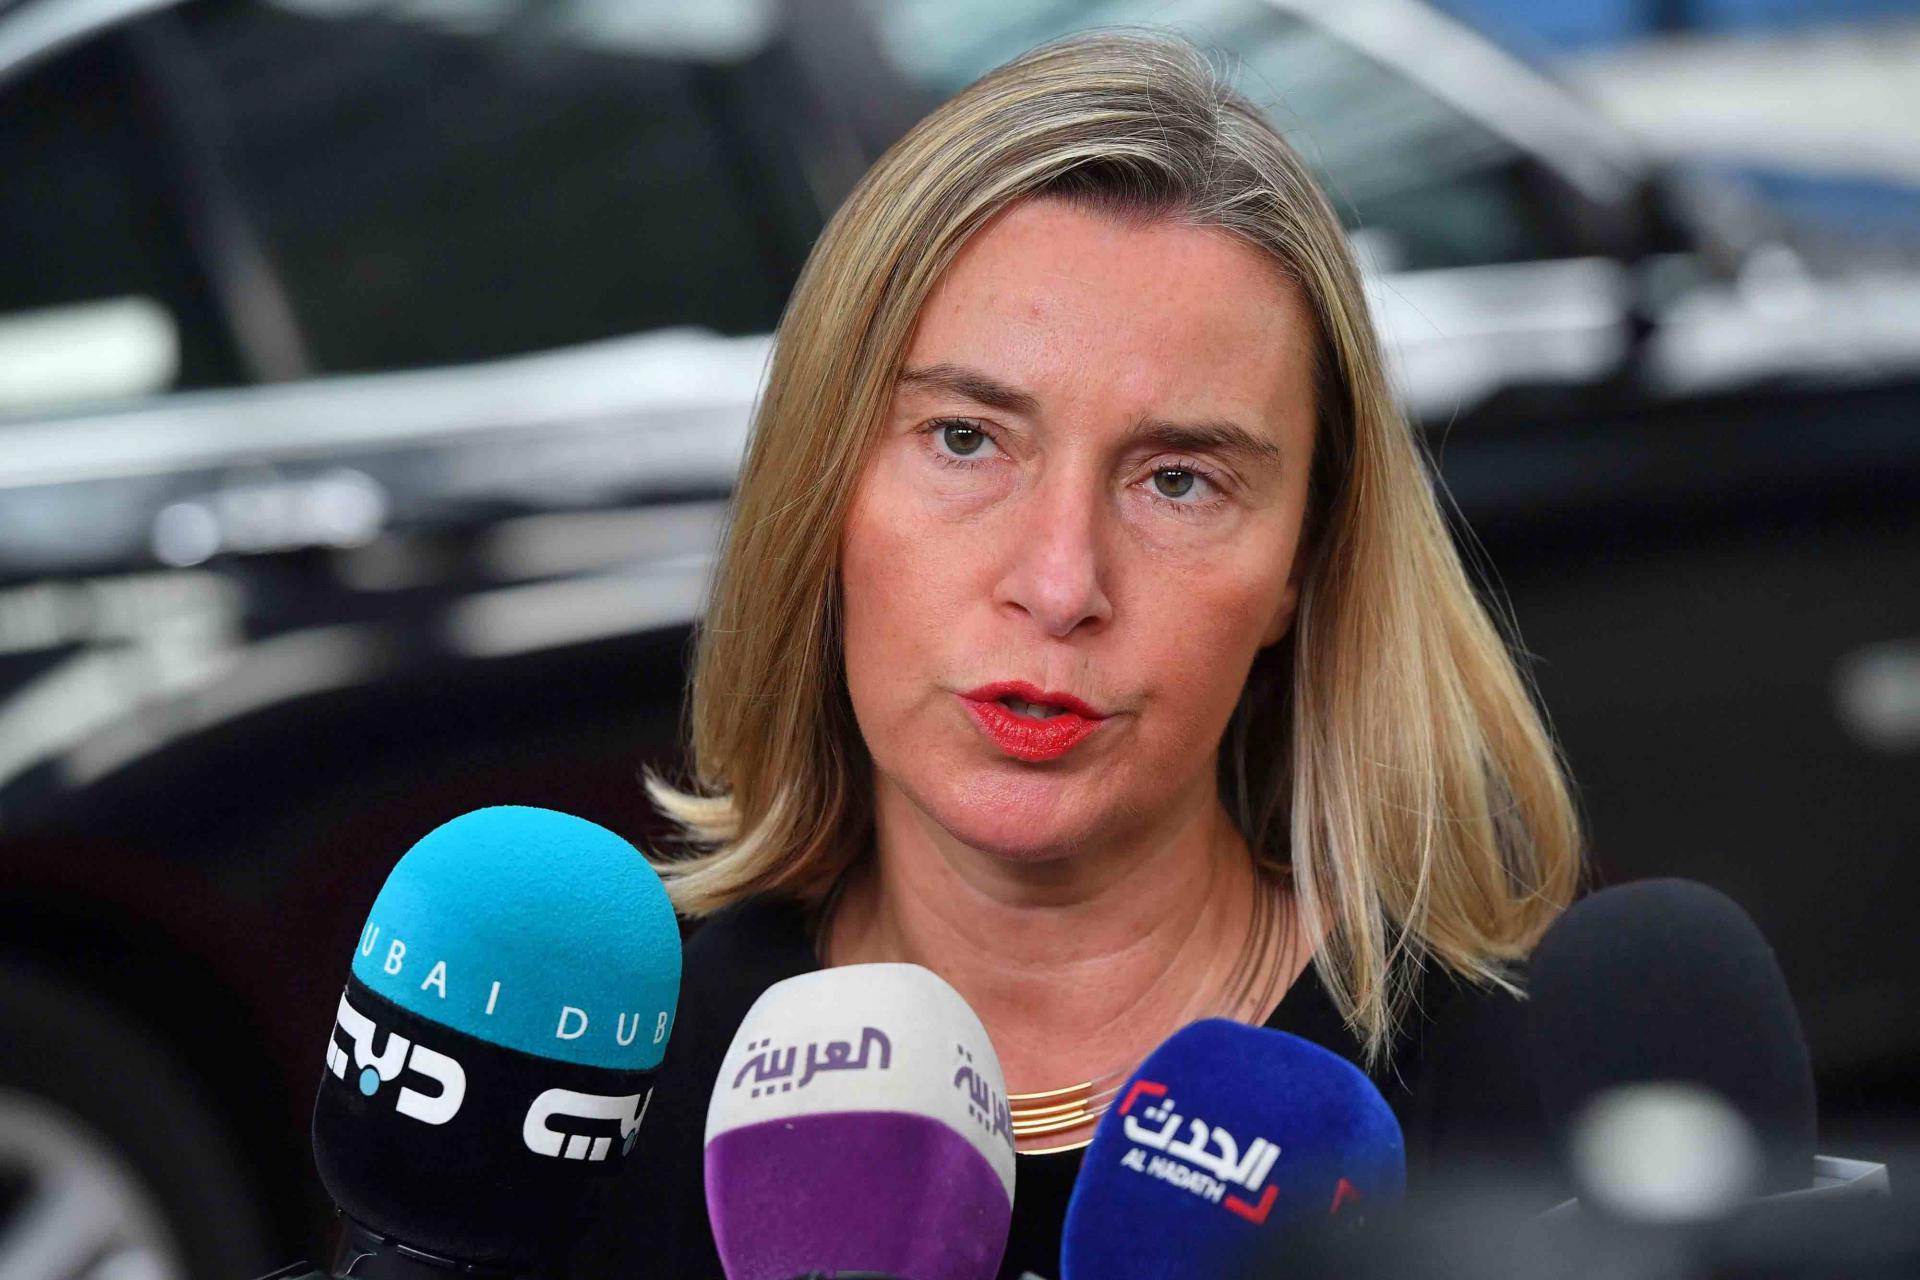 EU diplomatic chief Federica Mogherini gave a cautious welcome to the idea of negotiations